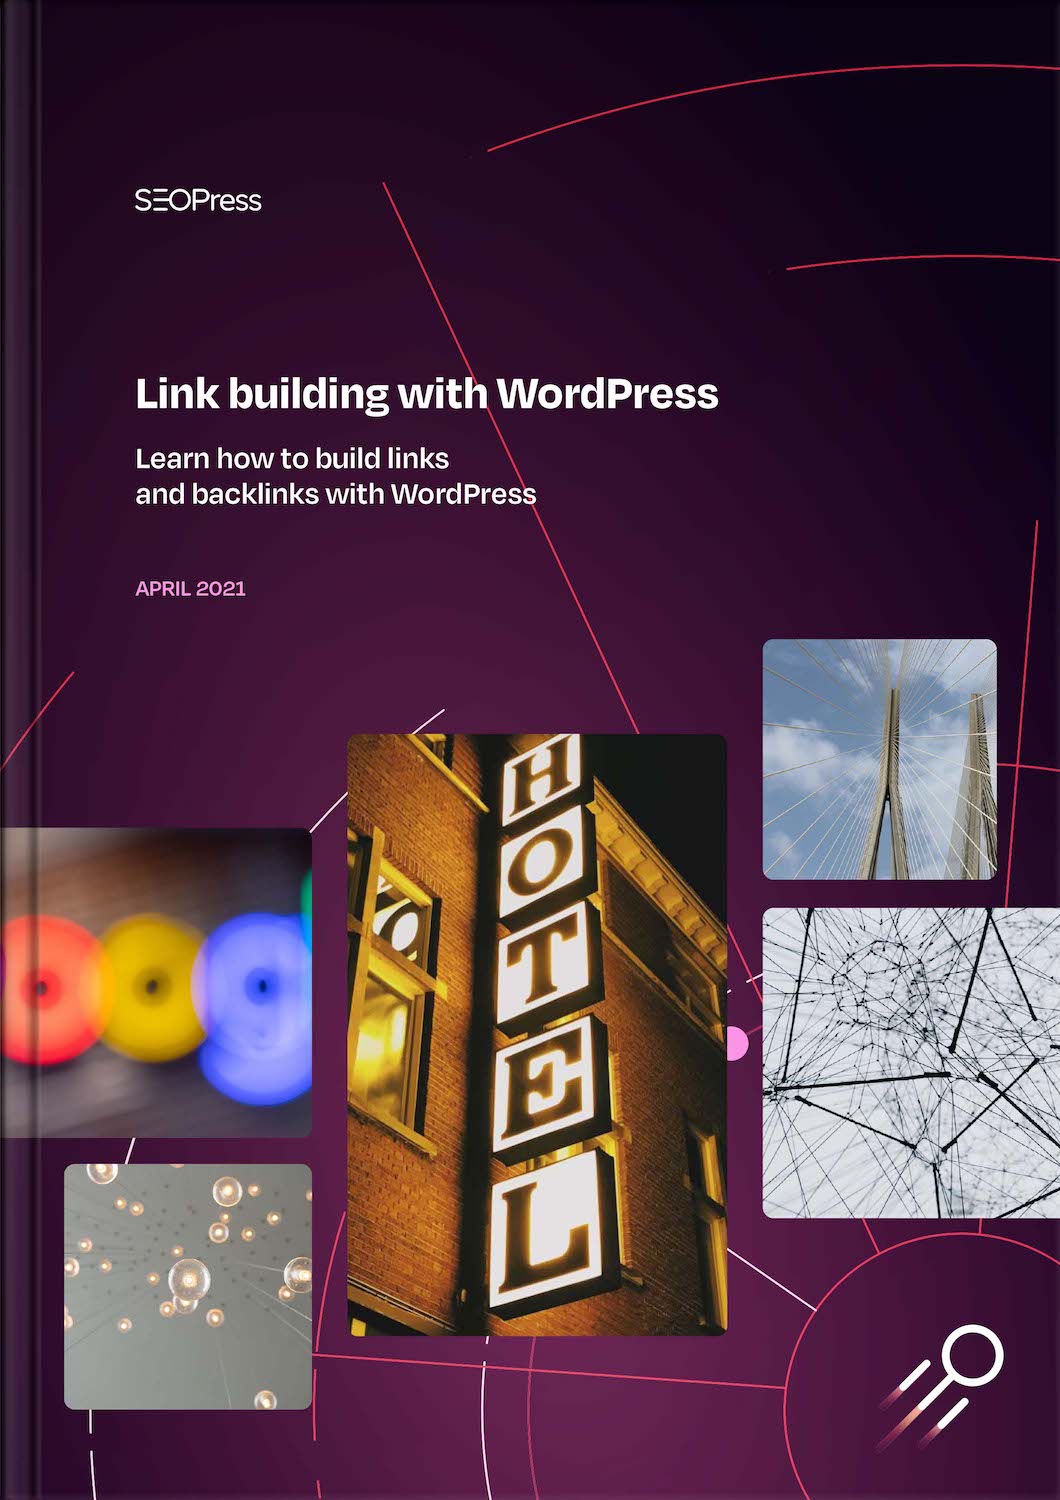 Link building with WordPress